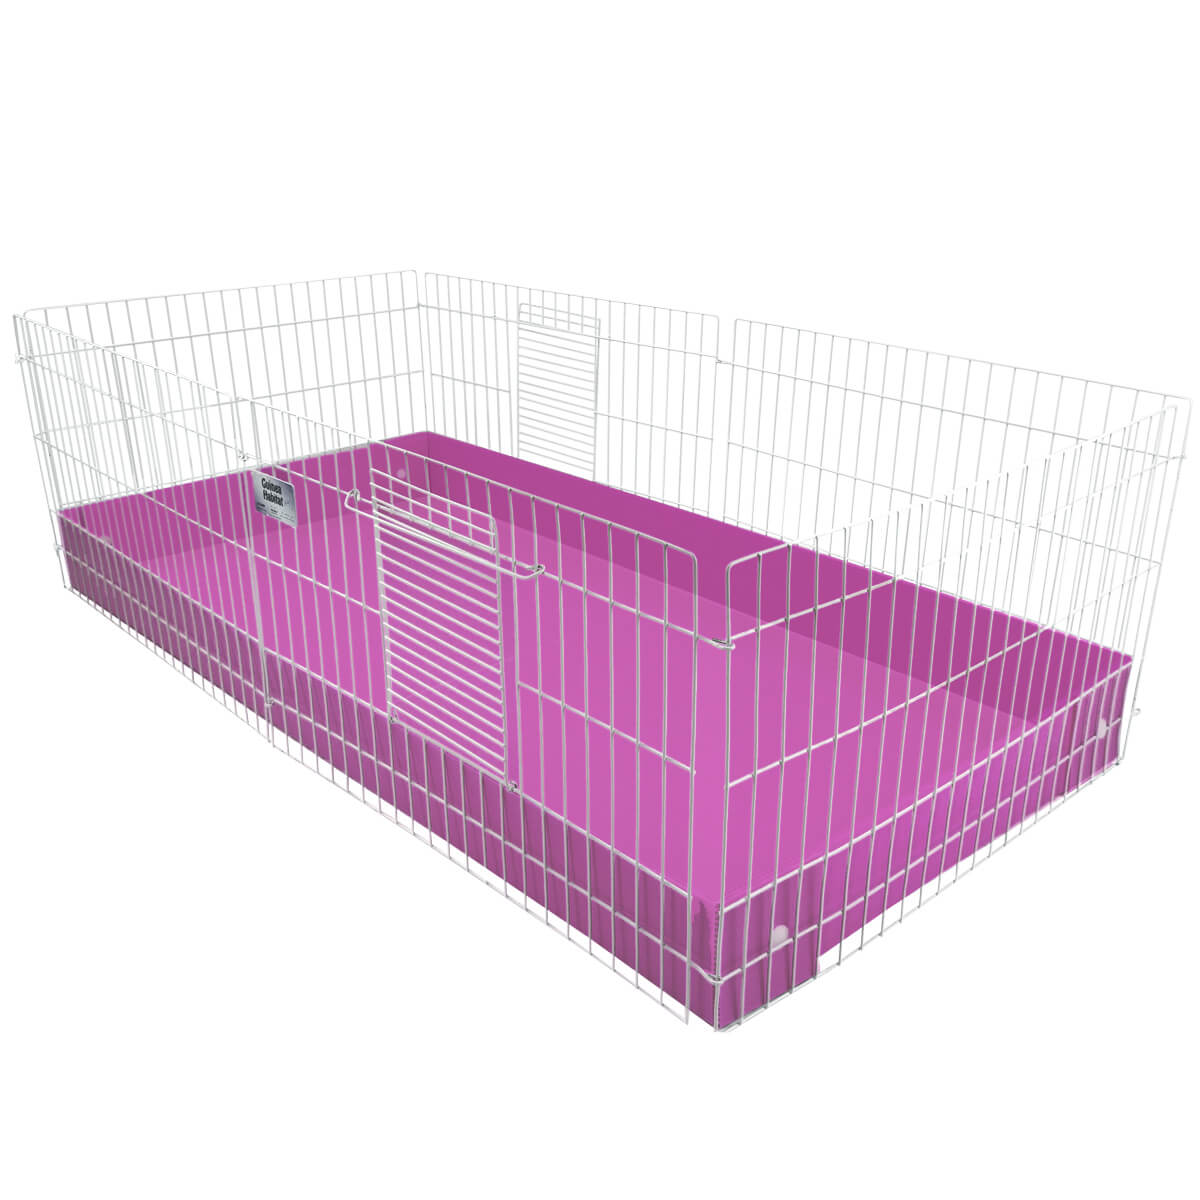 Midwest Guinea Pig Habitat Cage Coroplast Base On Clearance